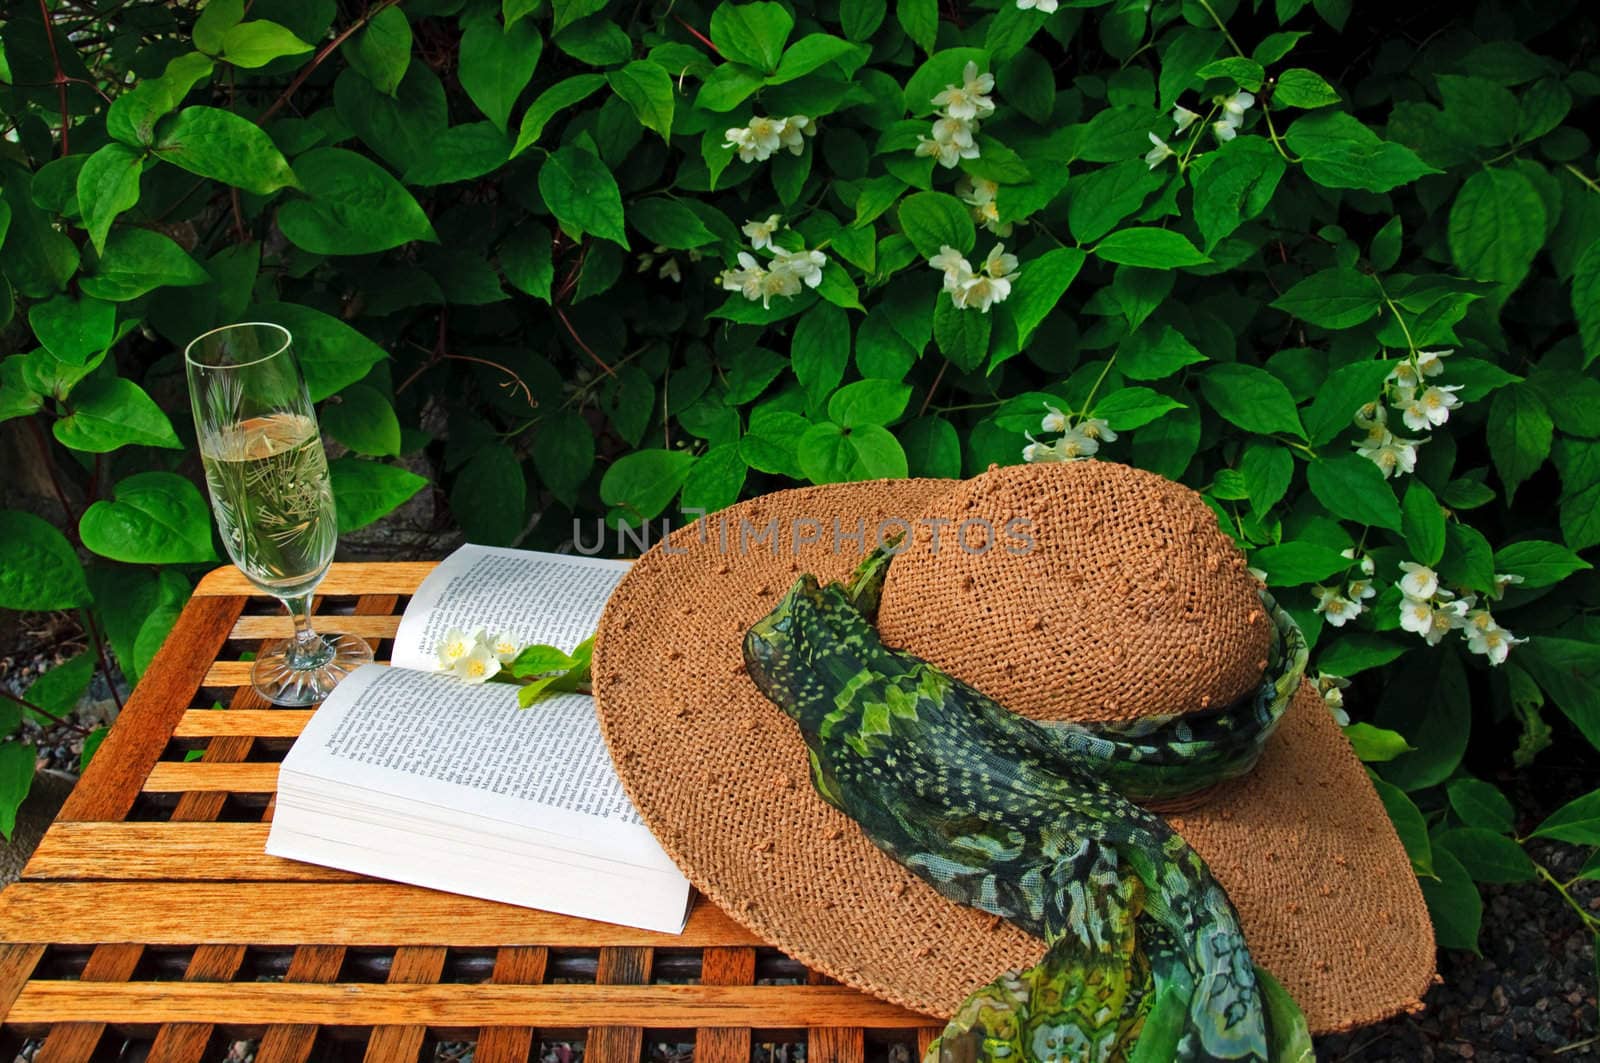 A straw hat, a book and a glass of white vine on a garden table